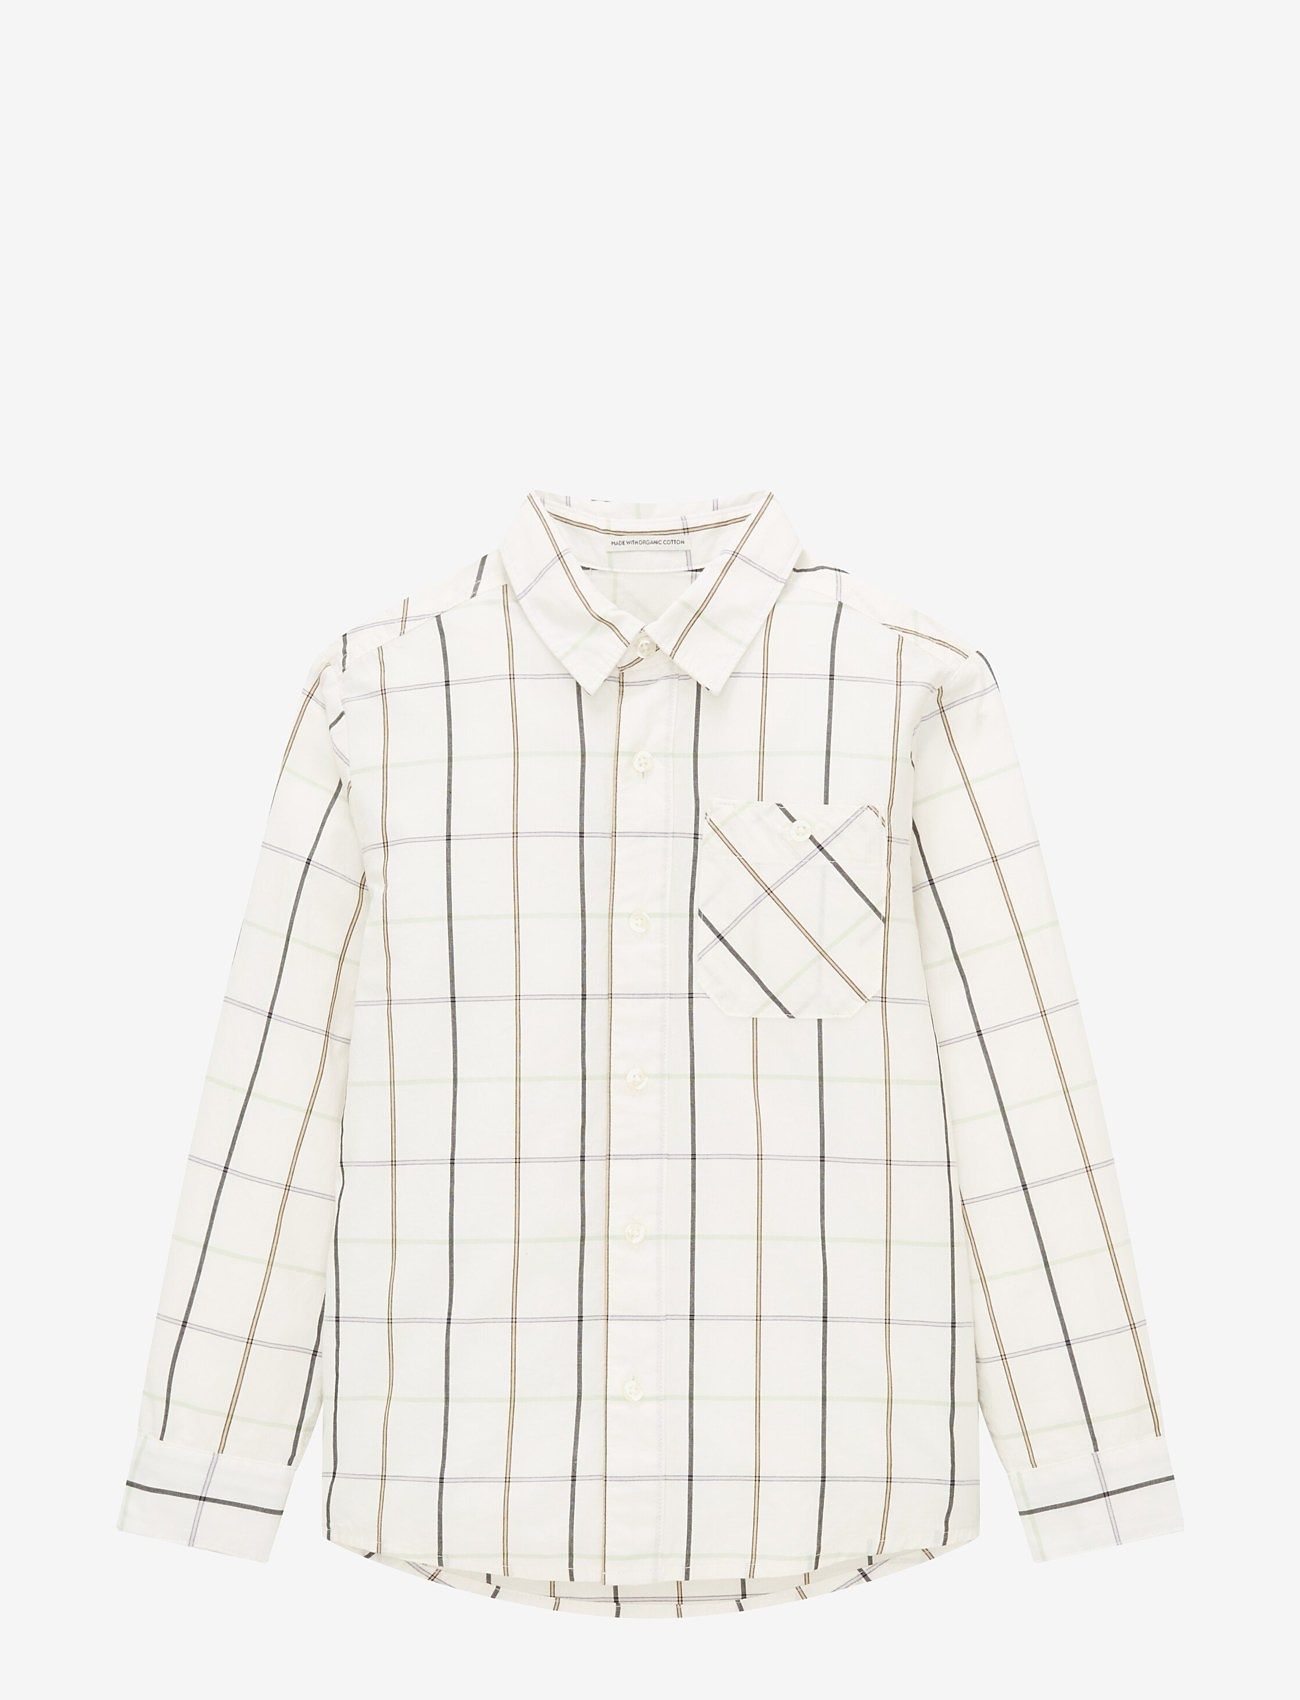 Tom Tailor - check pattern shirt with pocket - off white colorful check - 0